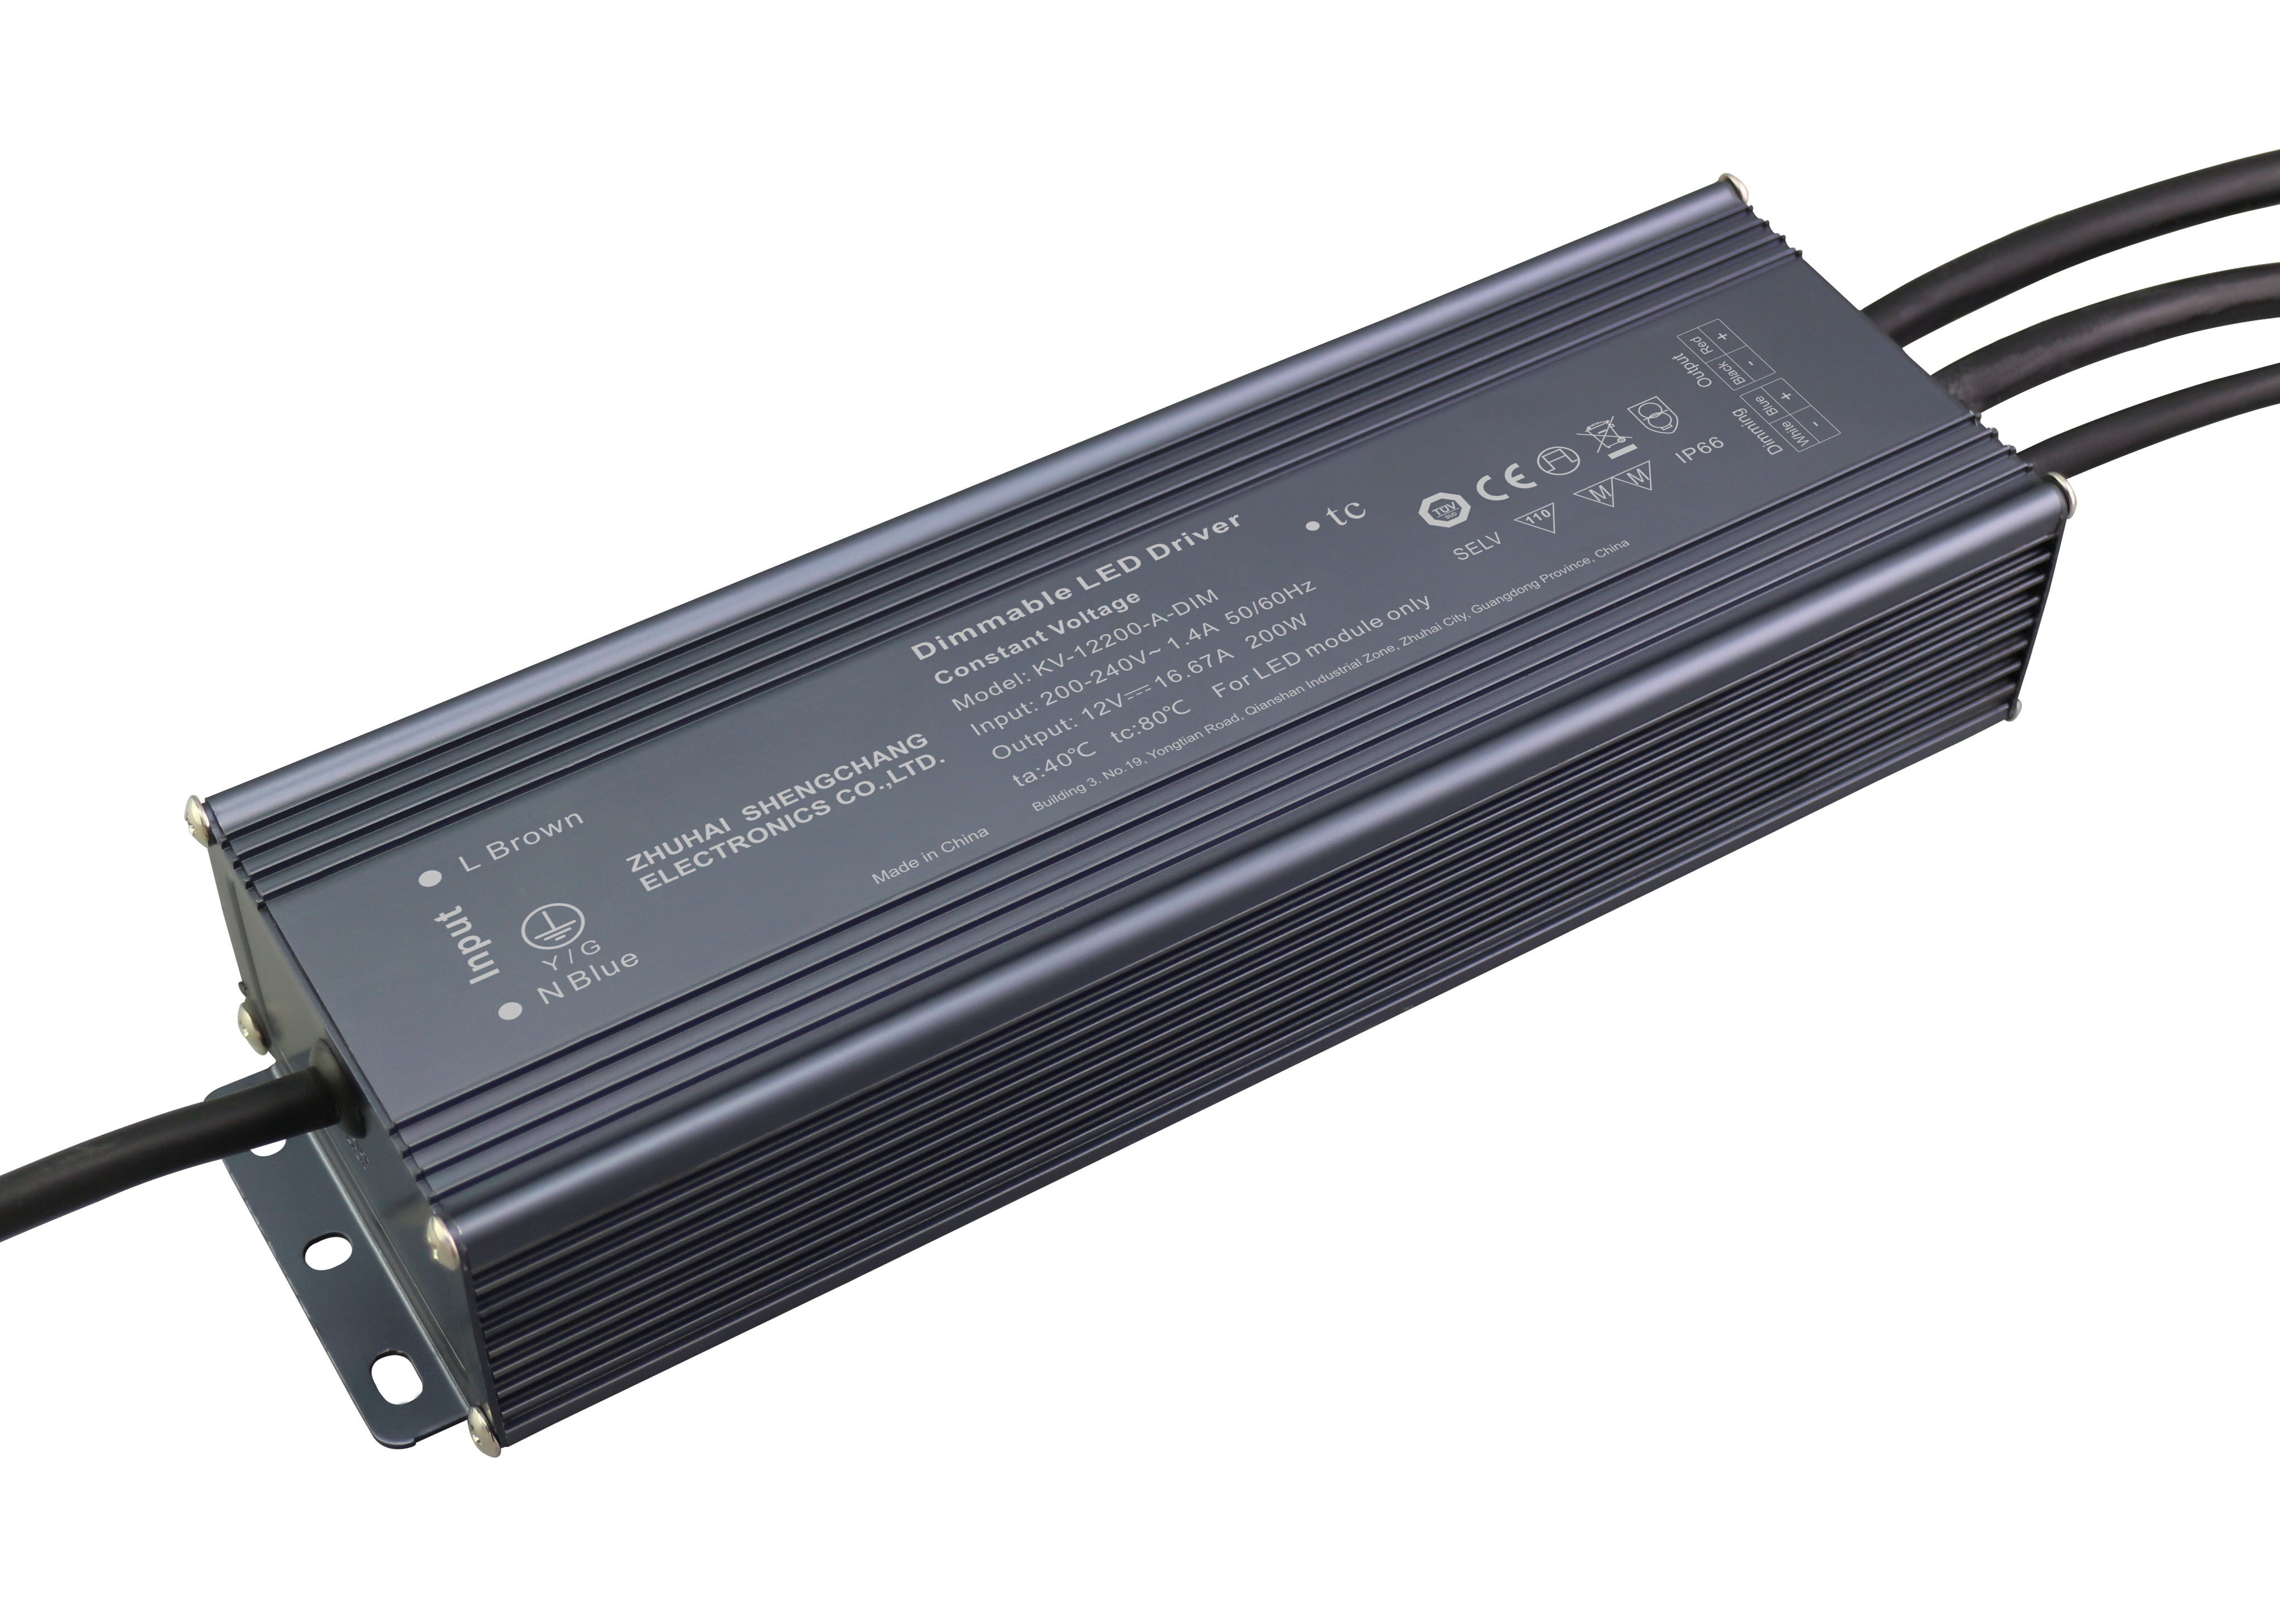 KV-A-DIM Series 200W 0/1-10V constant voltage dimmable LED driver